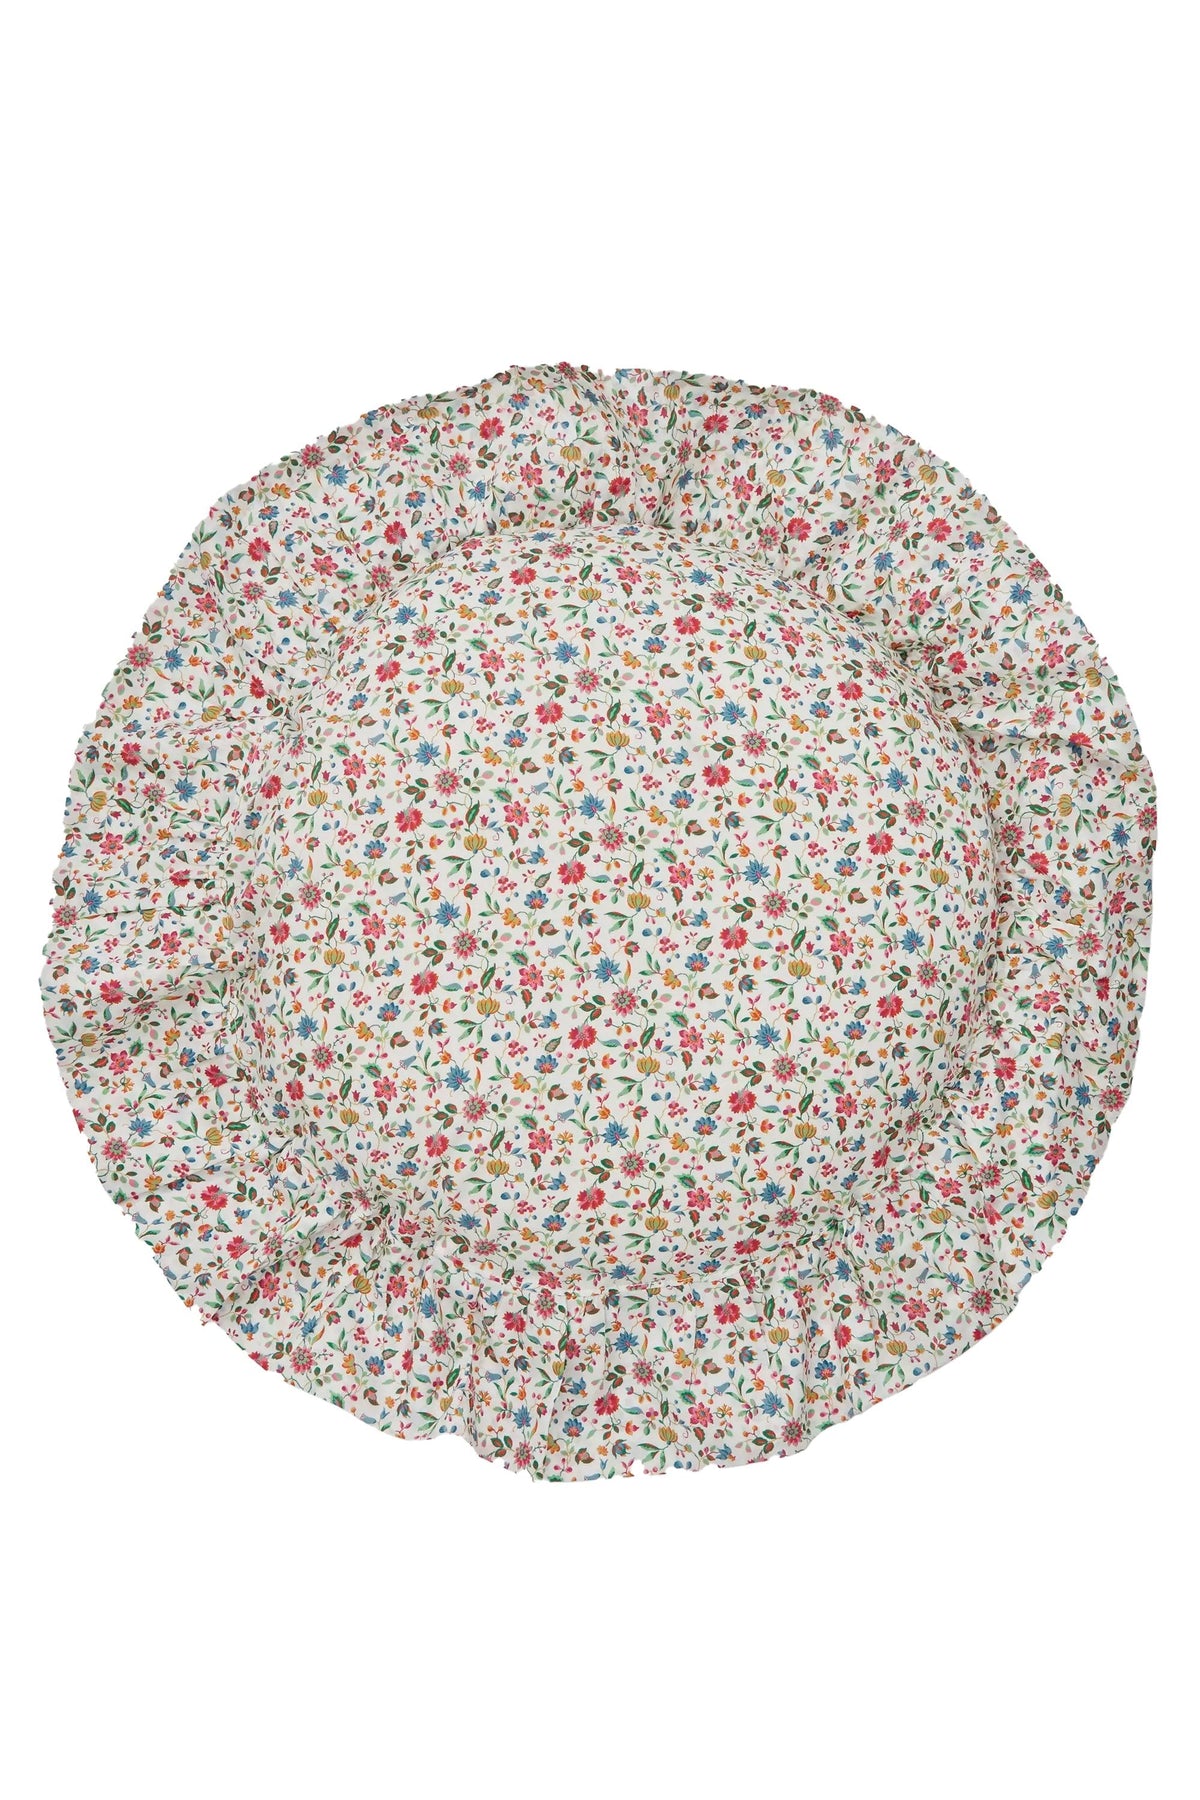 Circle Ruffle Cushion made with Liberty Fabric LUNA BELLE - Coco & Wolf